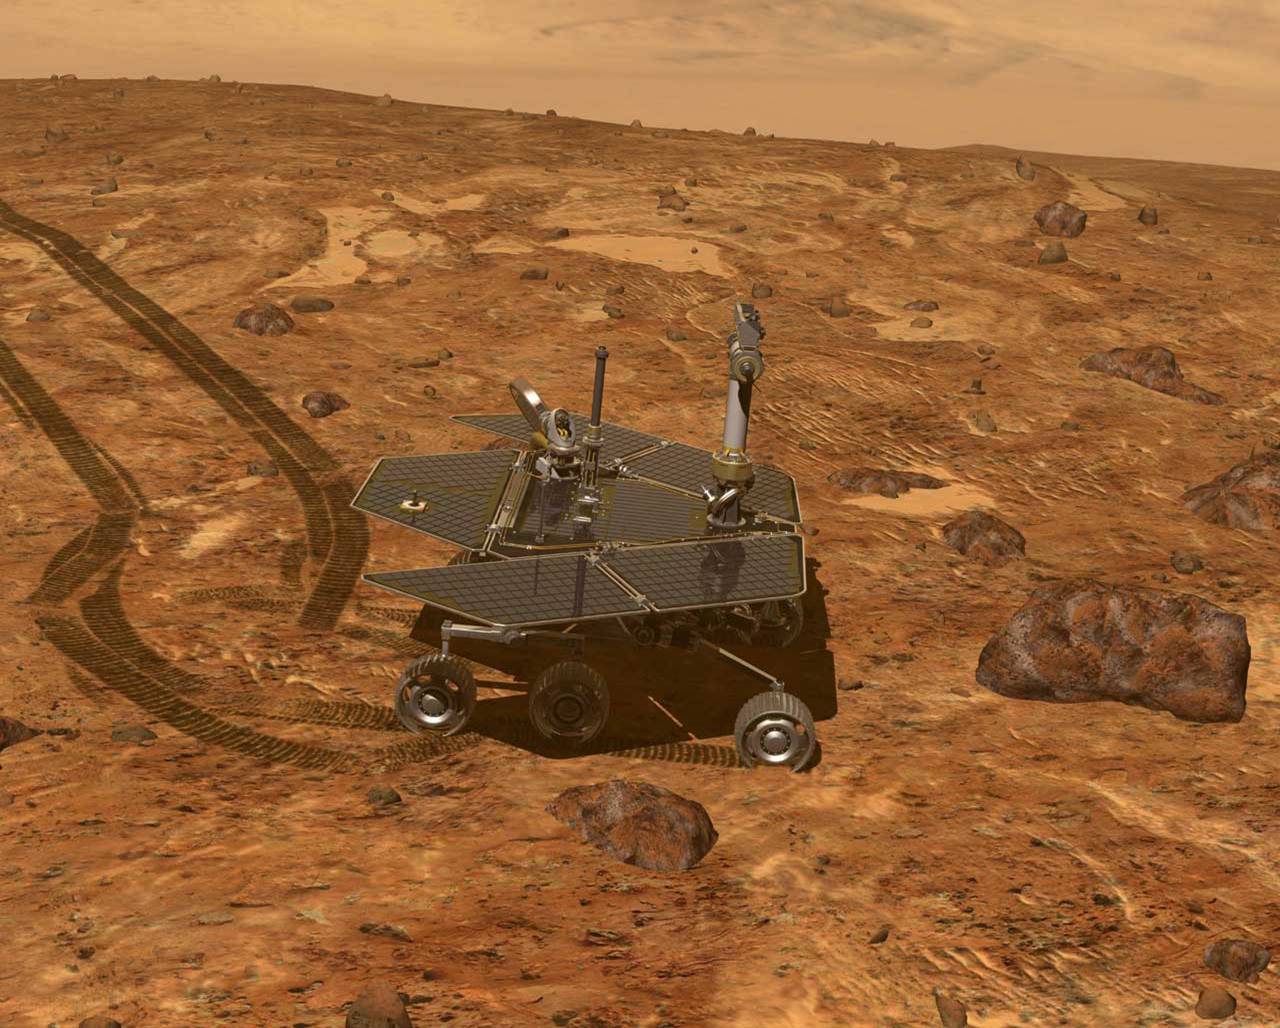 Artist's concept of controlling the rover from Earth, scientists drive the rover along Mars' surface inspecting geological features.